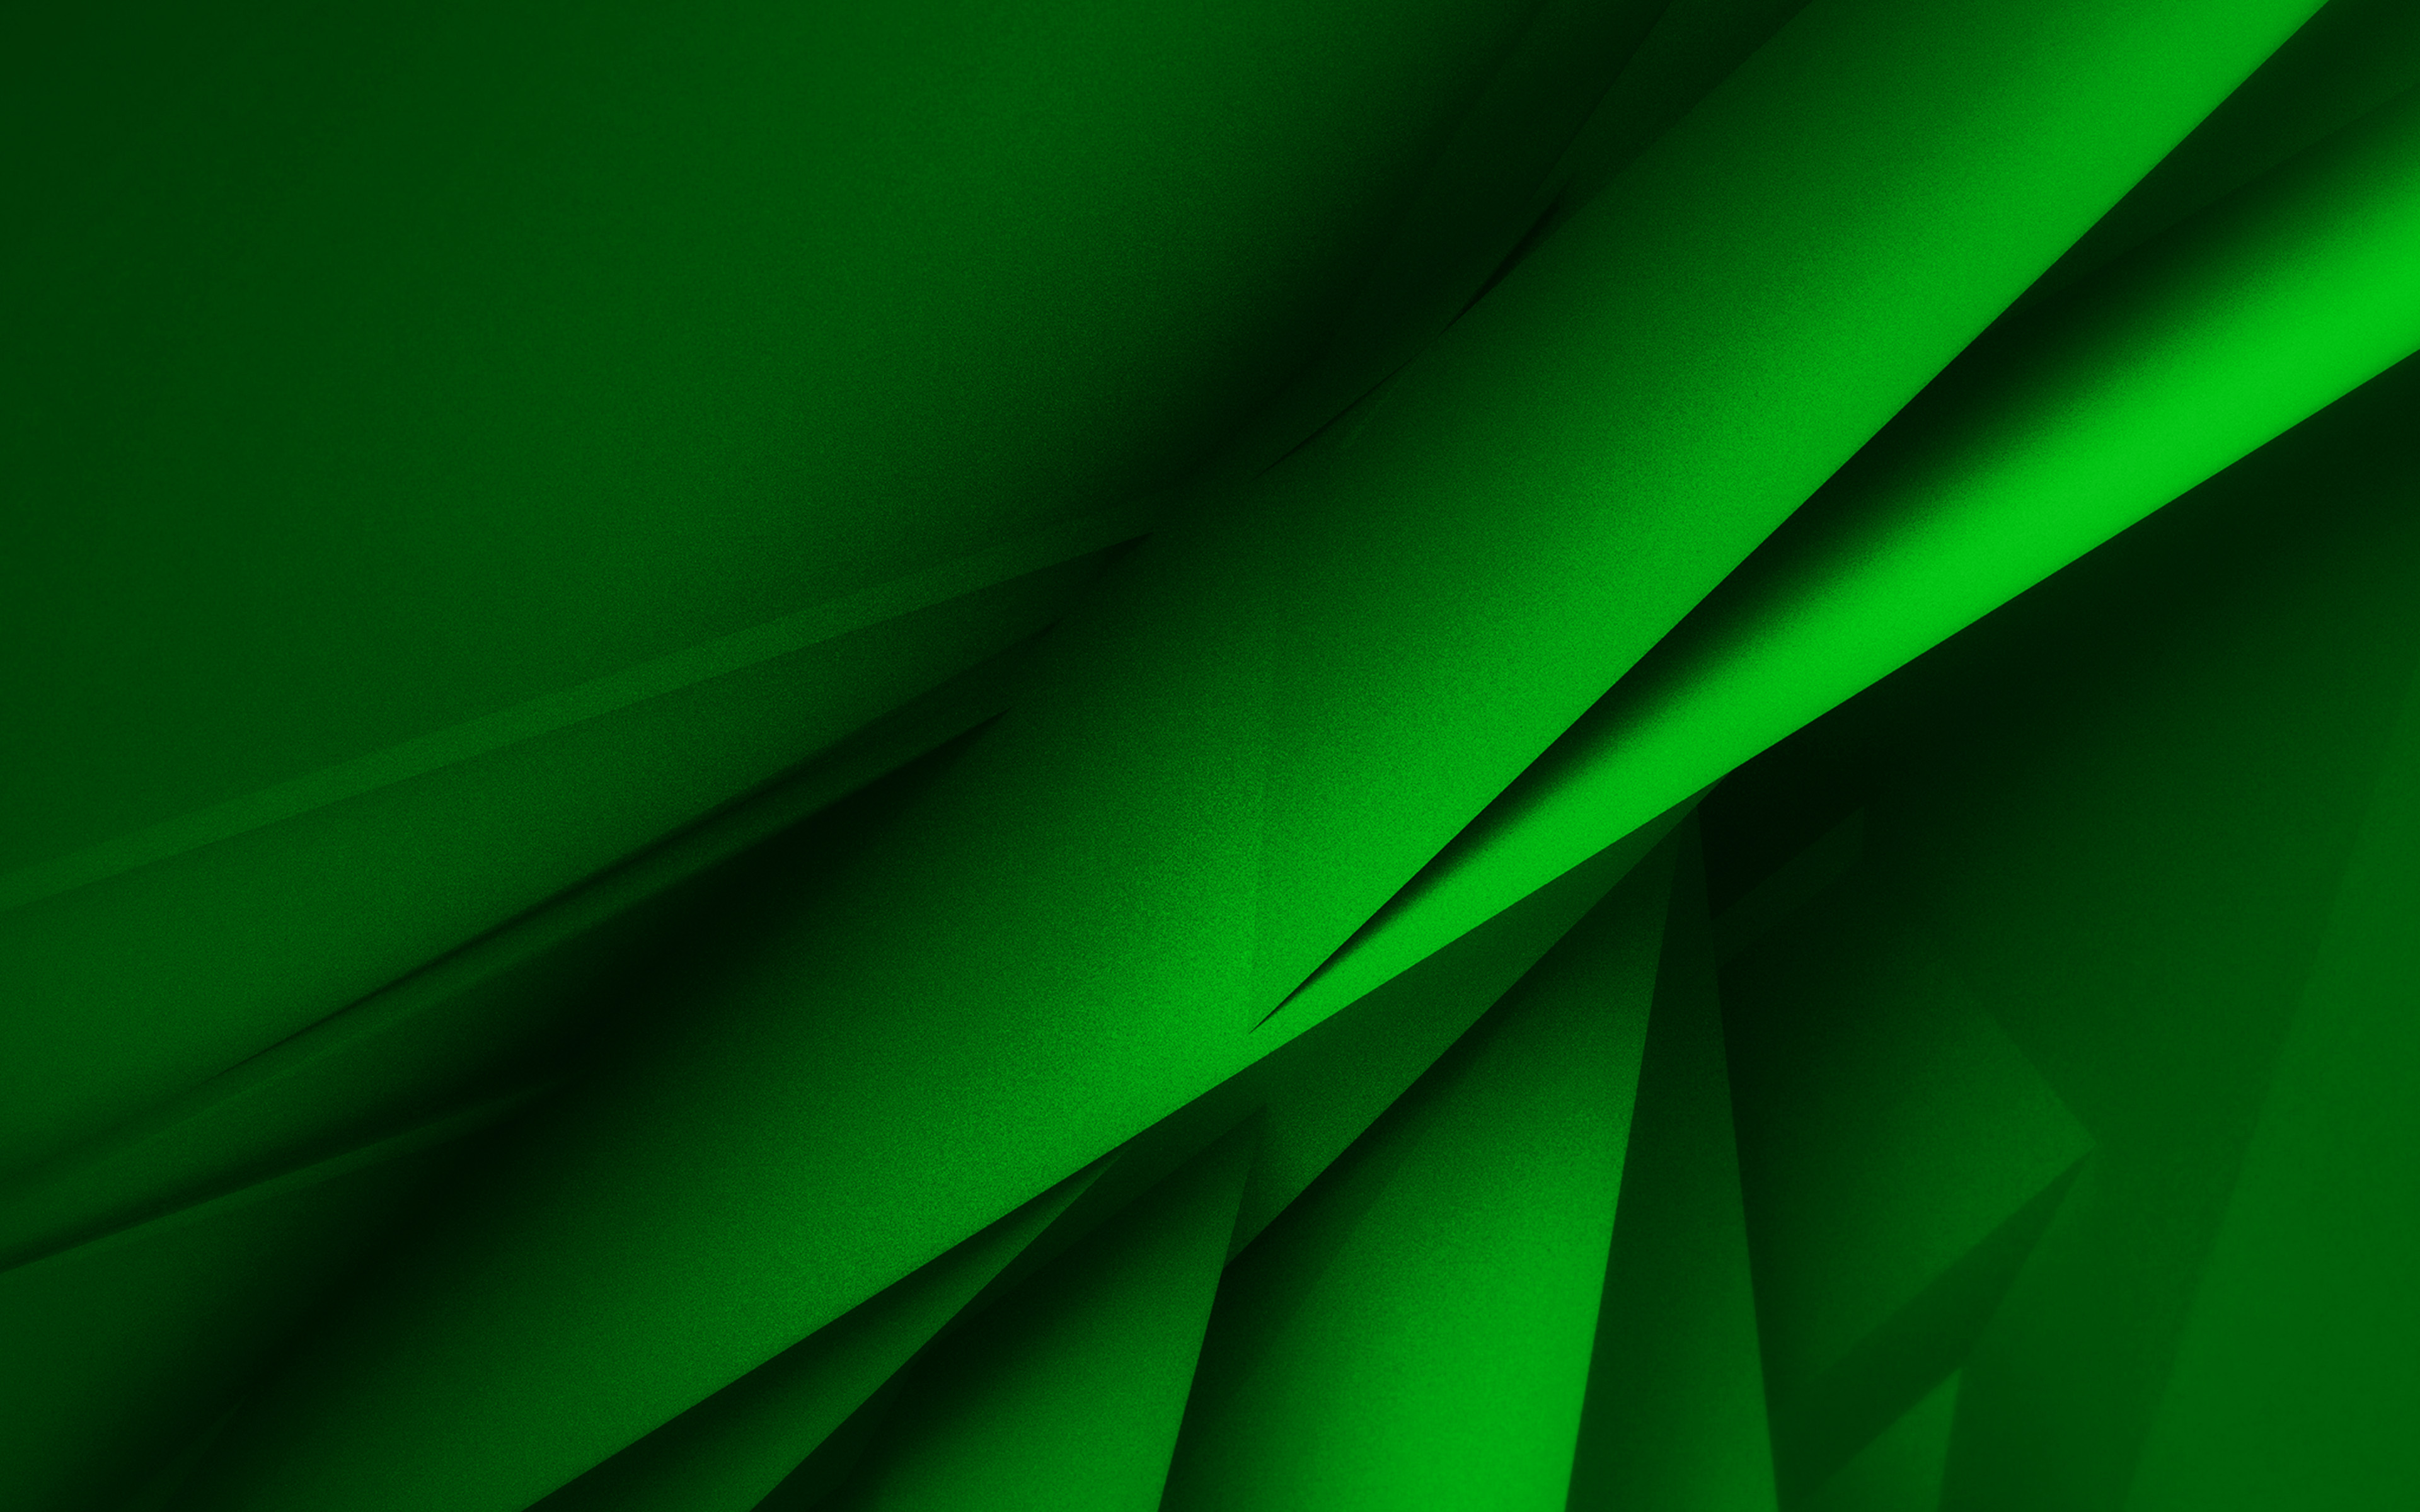 Download wallpapers green geometric shapes, 4K, 3D textures, geometric  textures, green backgrounds, 3D geometric background, green abstract  backgrounds for desktop with resolution 3840x2400. High Quality HD pictures  wallpapers